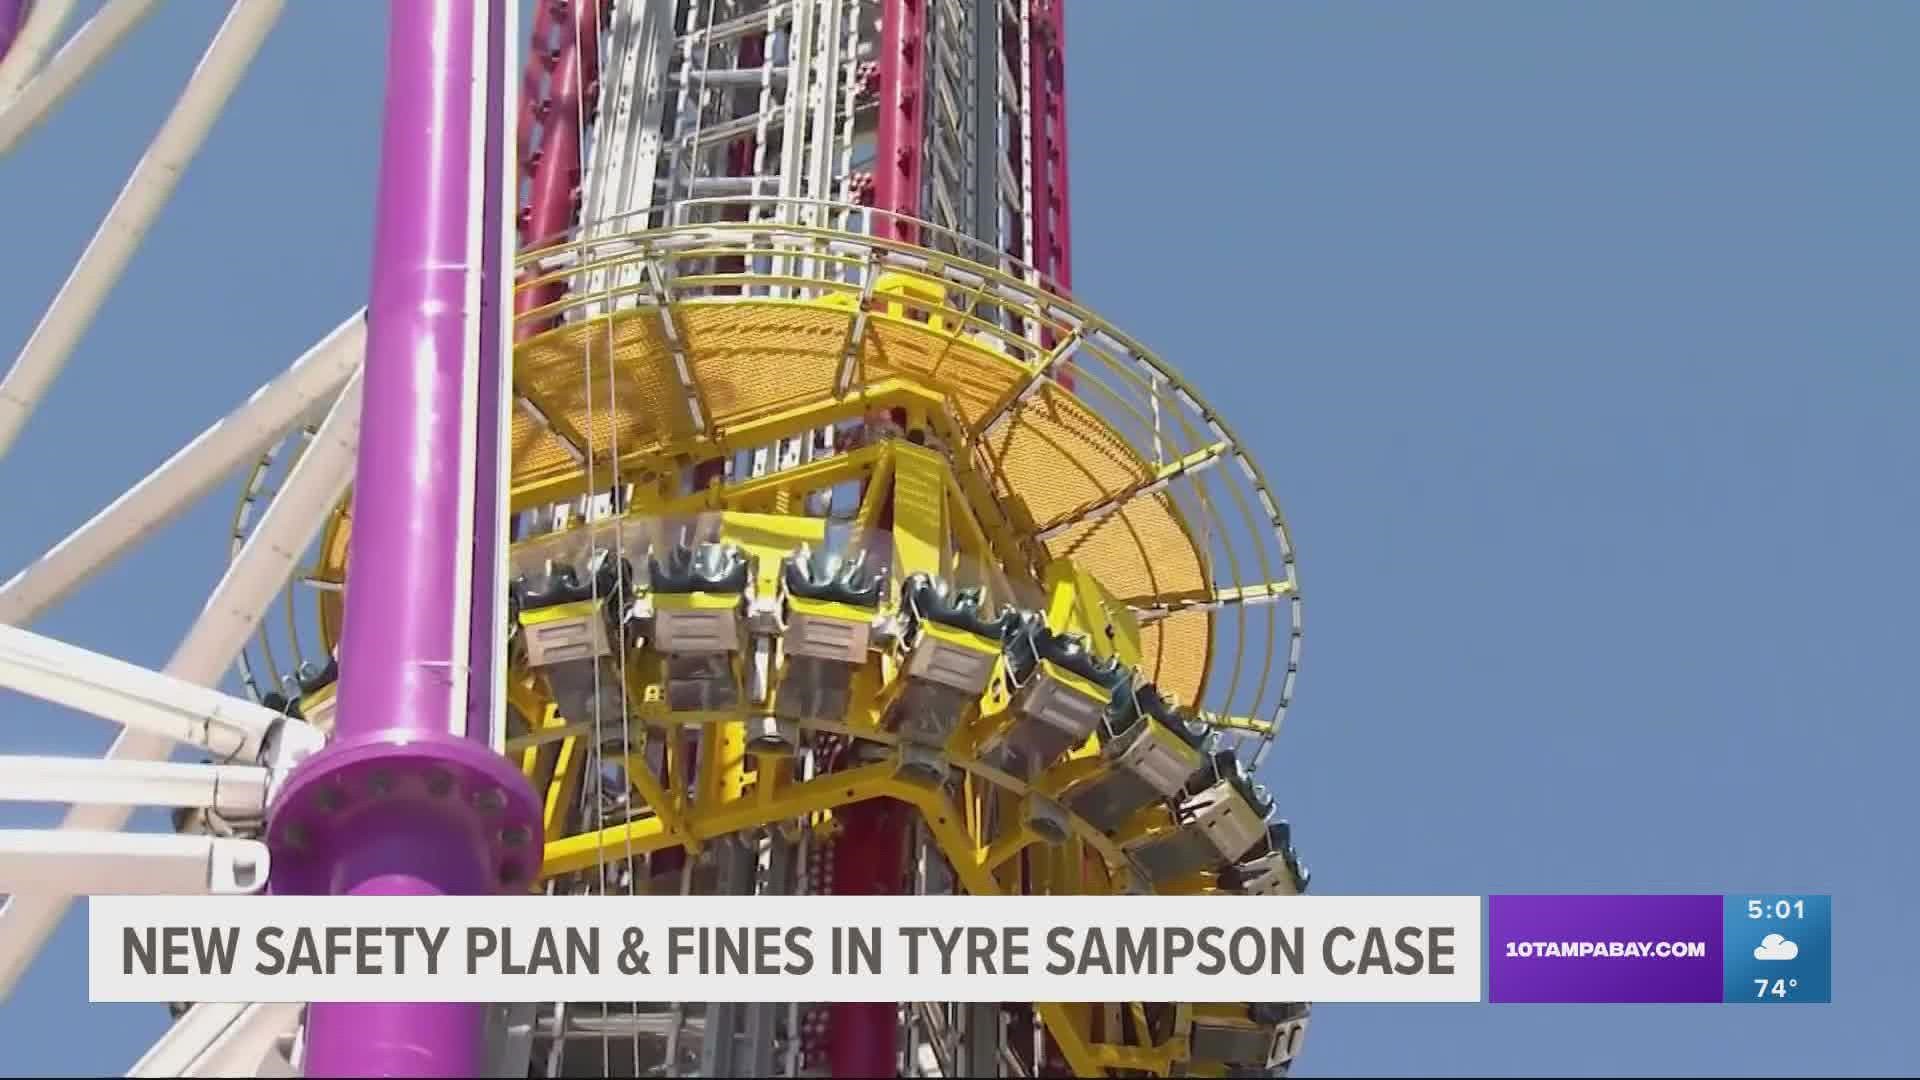 The commissioner explained the department’s investigation found that the teen fell from the drop tower because of changes made to the ride by its operators.